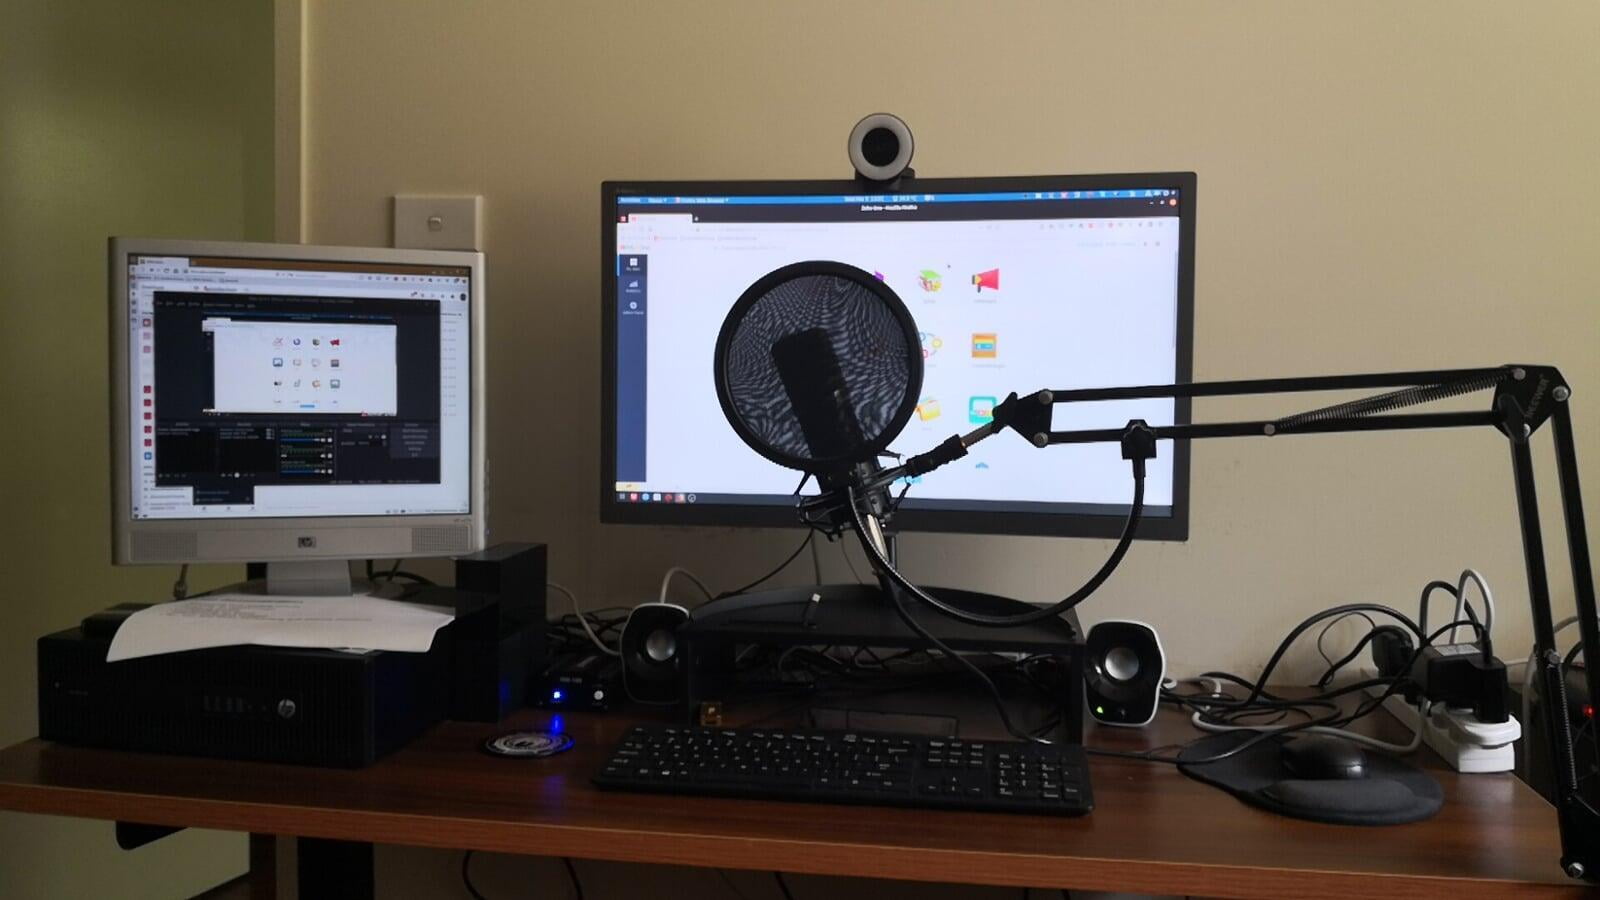 My setup for recording